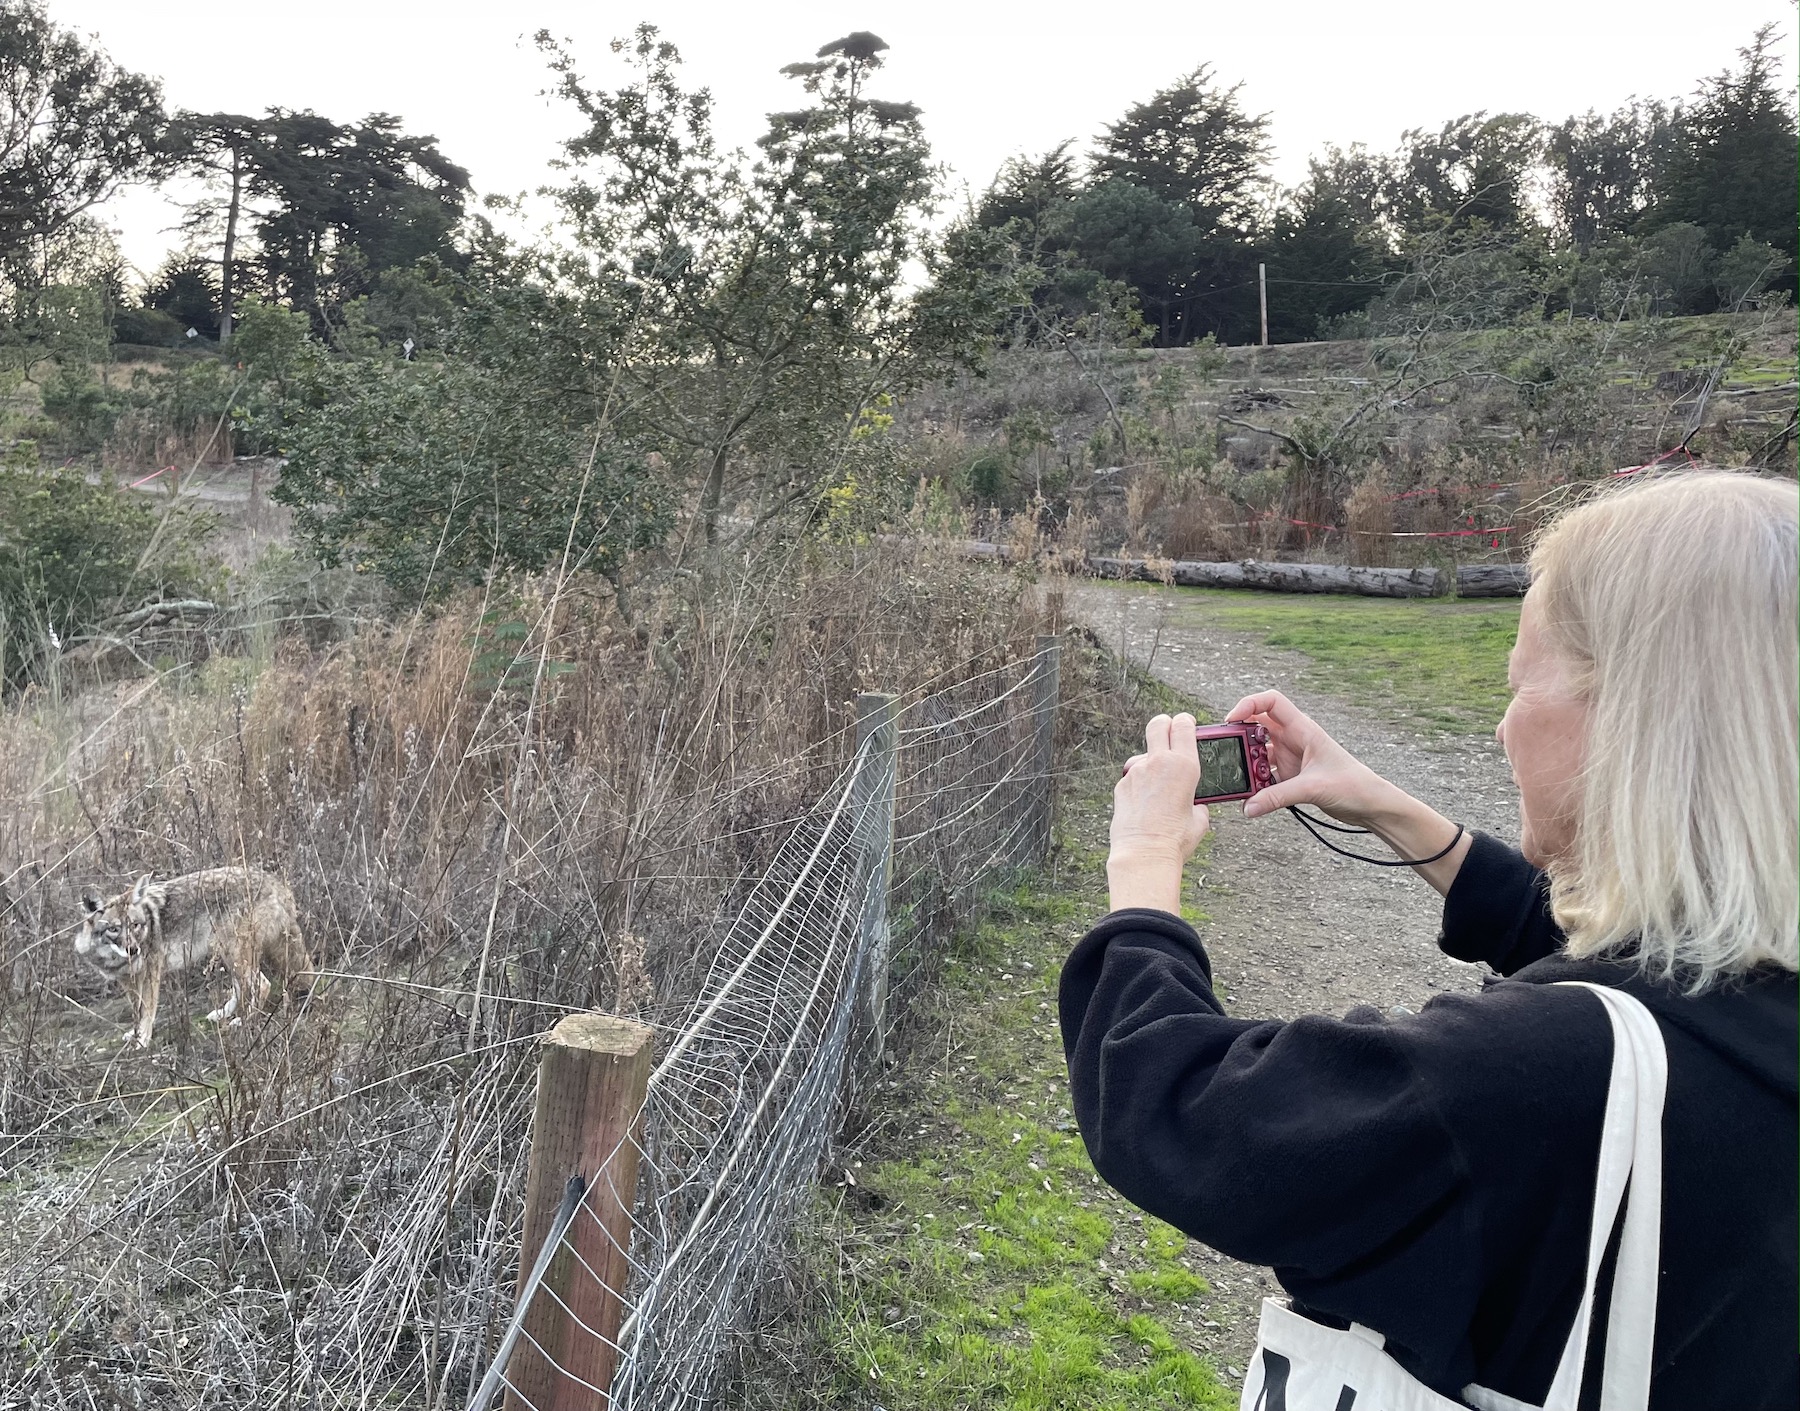 A woman taking a photo of a coyote in an urban trail landscape. They're only a short distance apart, separated by a low wire fence. 